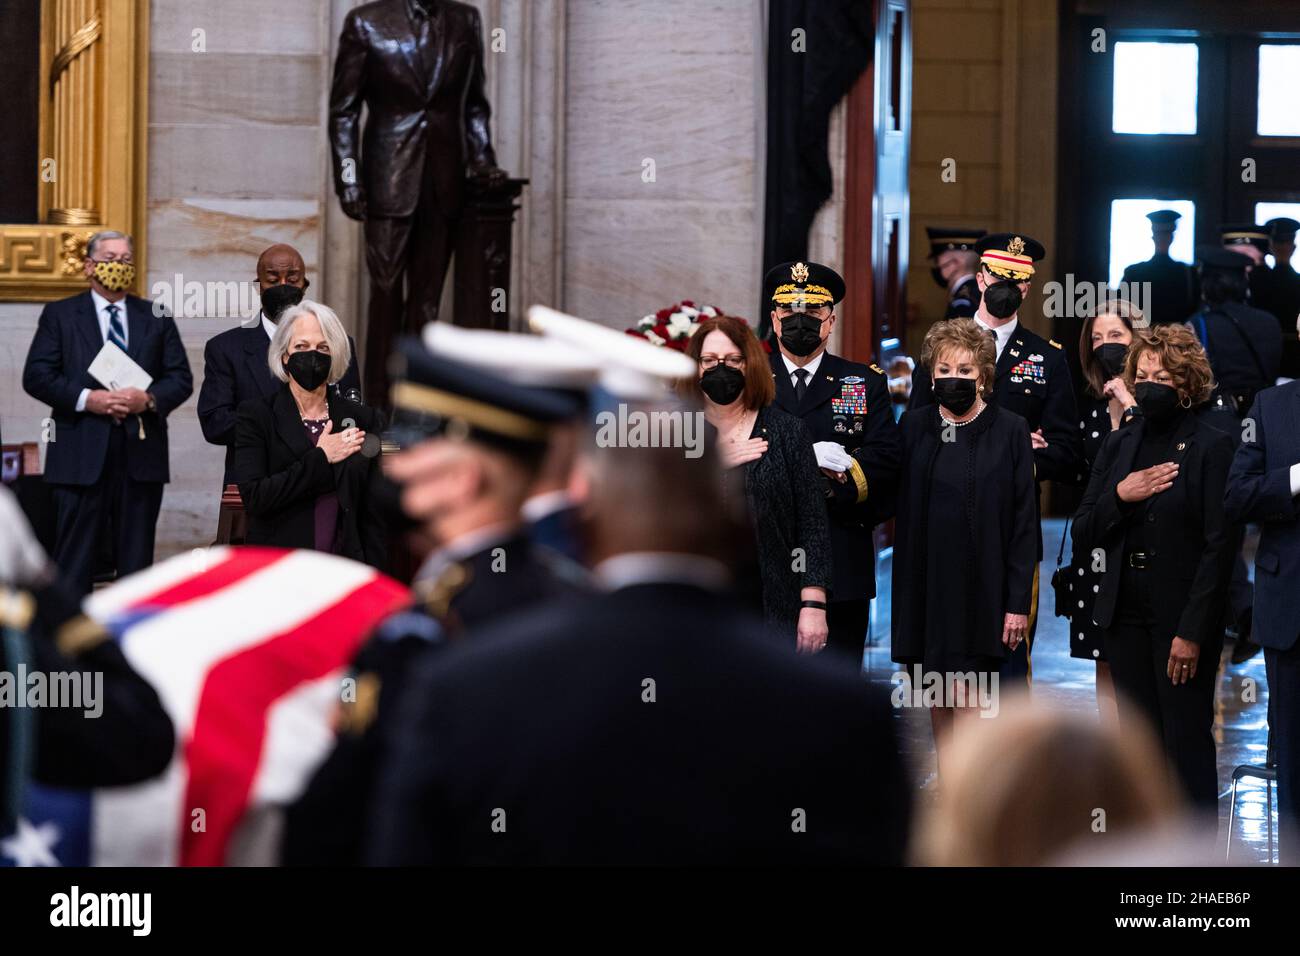 Washington, United States Of America. 09th Dec, 2021. Washington, United States of America. 09 December, 2021. Former U.S. Senator Elizabeth Dole, looks on as the Armed Forces honor guard carry the flag-draped casket of her husband, former Senator Robert Dole, into the Rotunda of the U.S. Capitol, December 9, 2021 in Washington, DC Senator Dole died at age 98 following a lifetime of service to the nation. Credit: Sgt. Zachery Perkins/U.S. Army/Alamy Live News Stock Photo